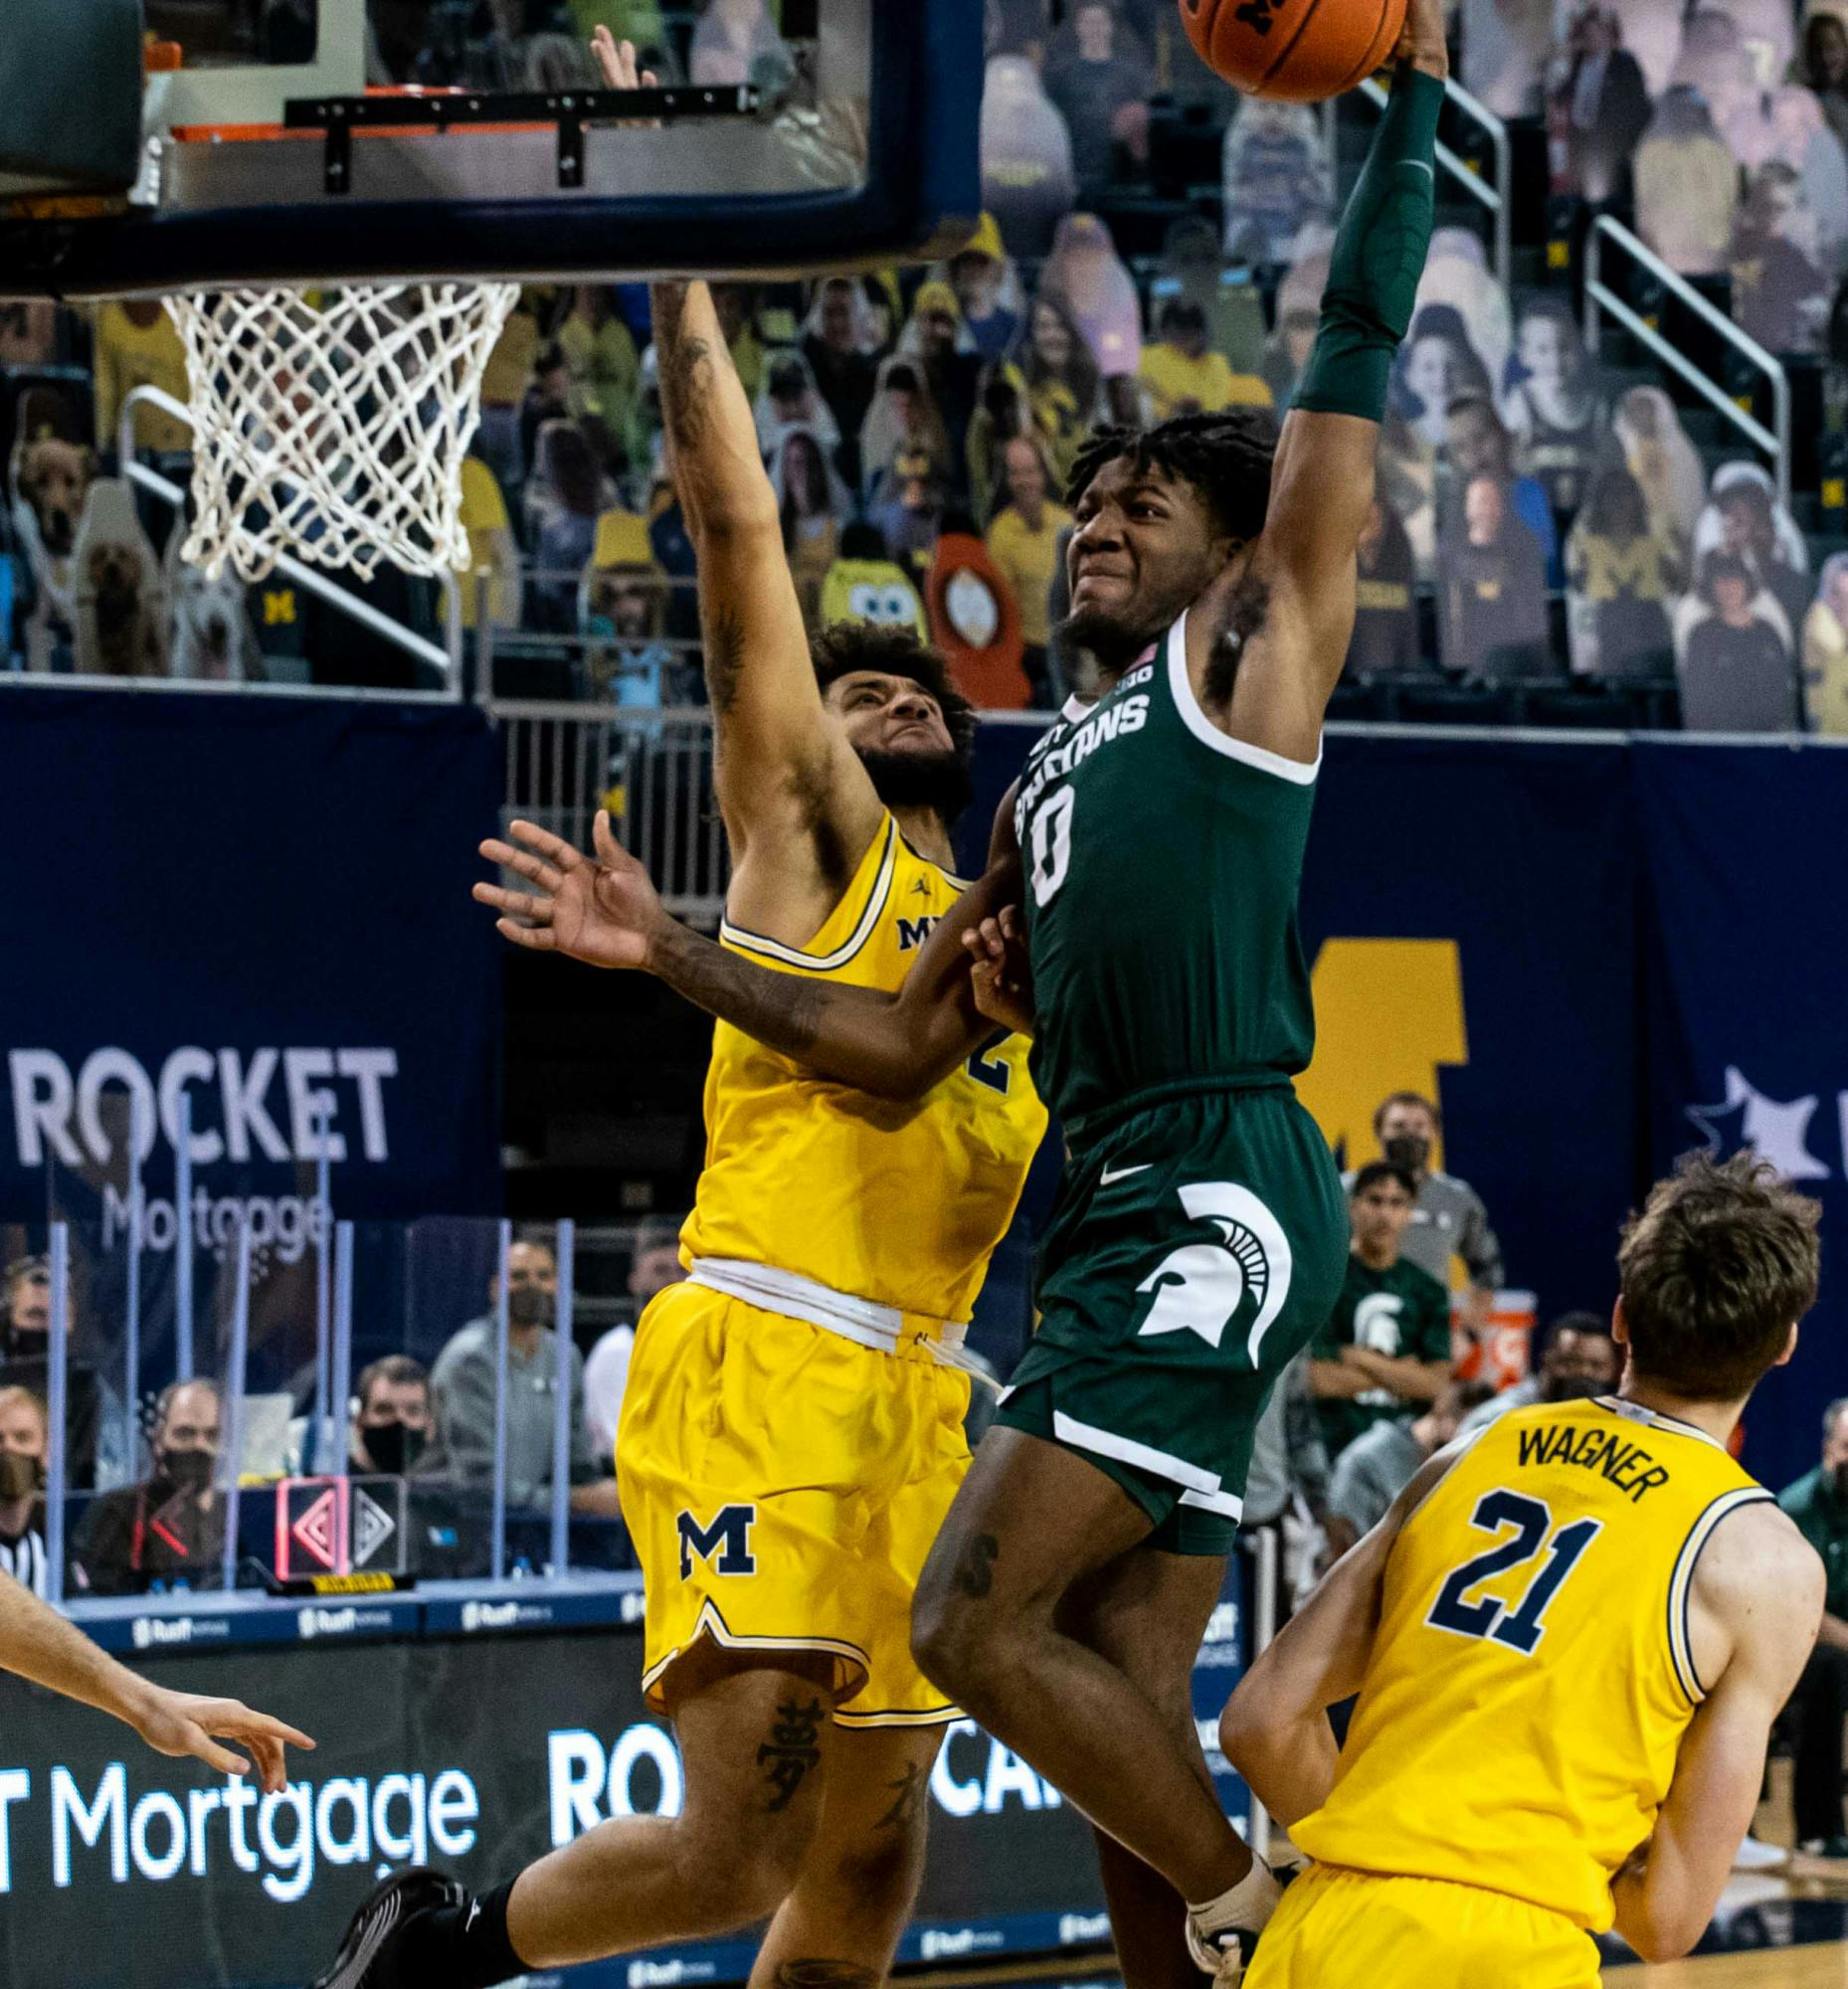 <p>Junior forward Aaron Henry (0) makes the first basket for Michigan State in the first half of the game. The Wolverines crushed the Spartans, 69-50, at Crisler Center on March 4, 2021.</p>